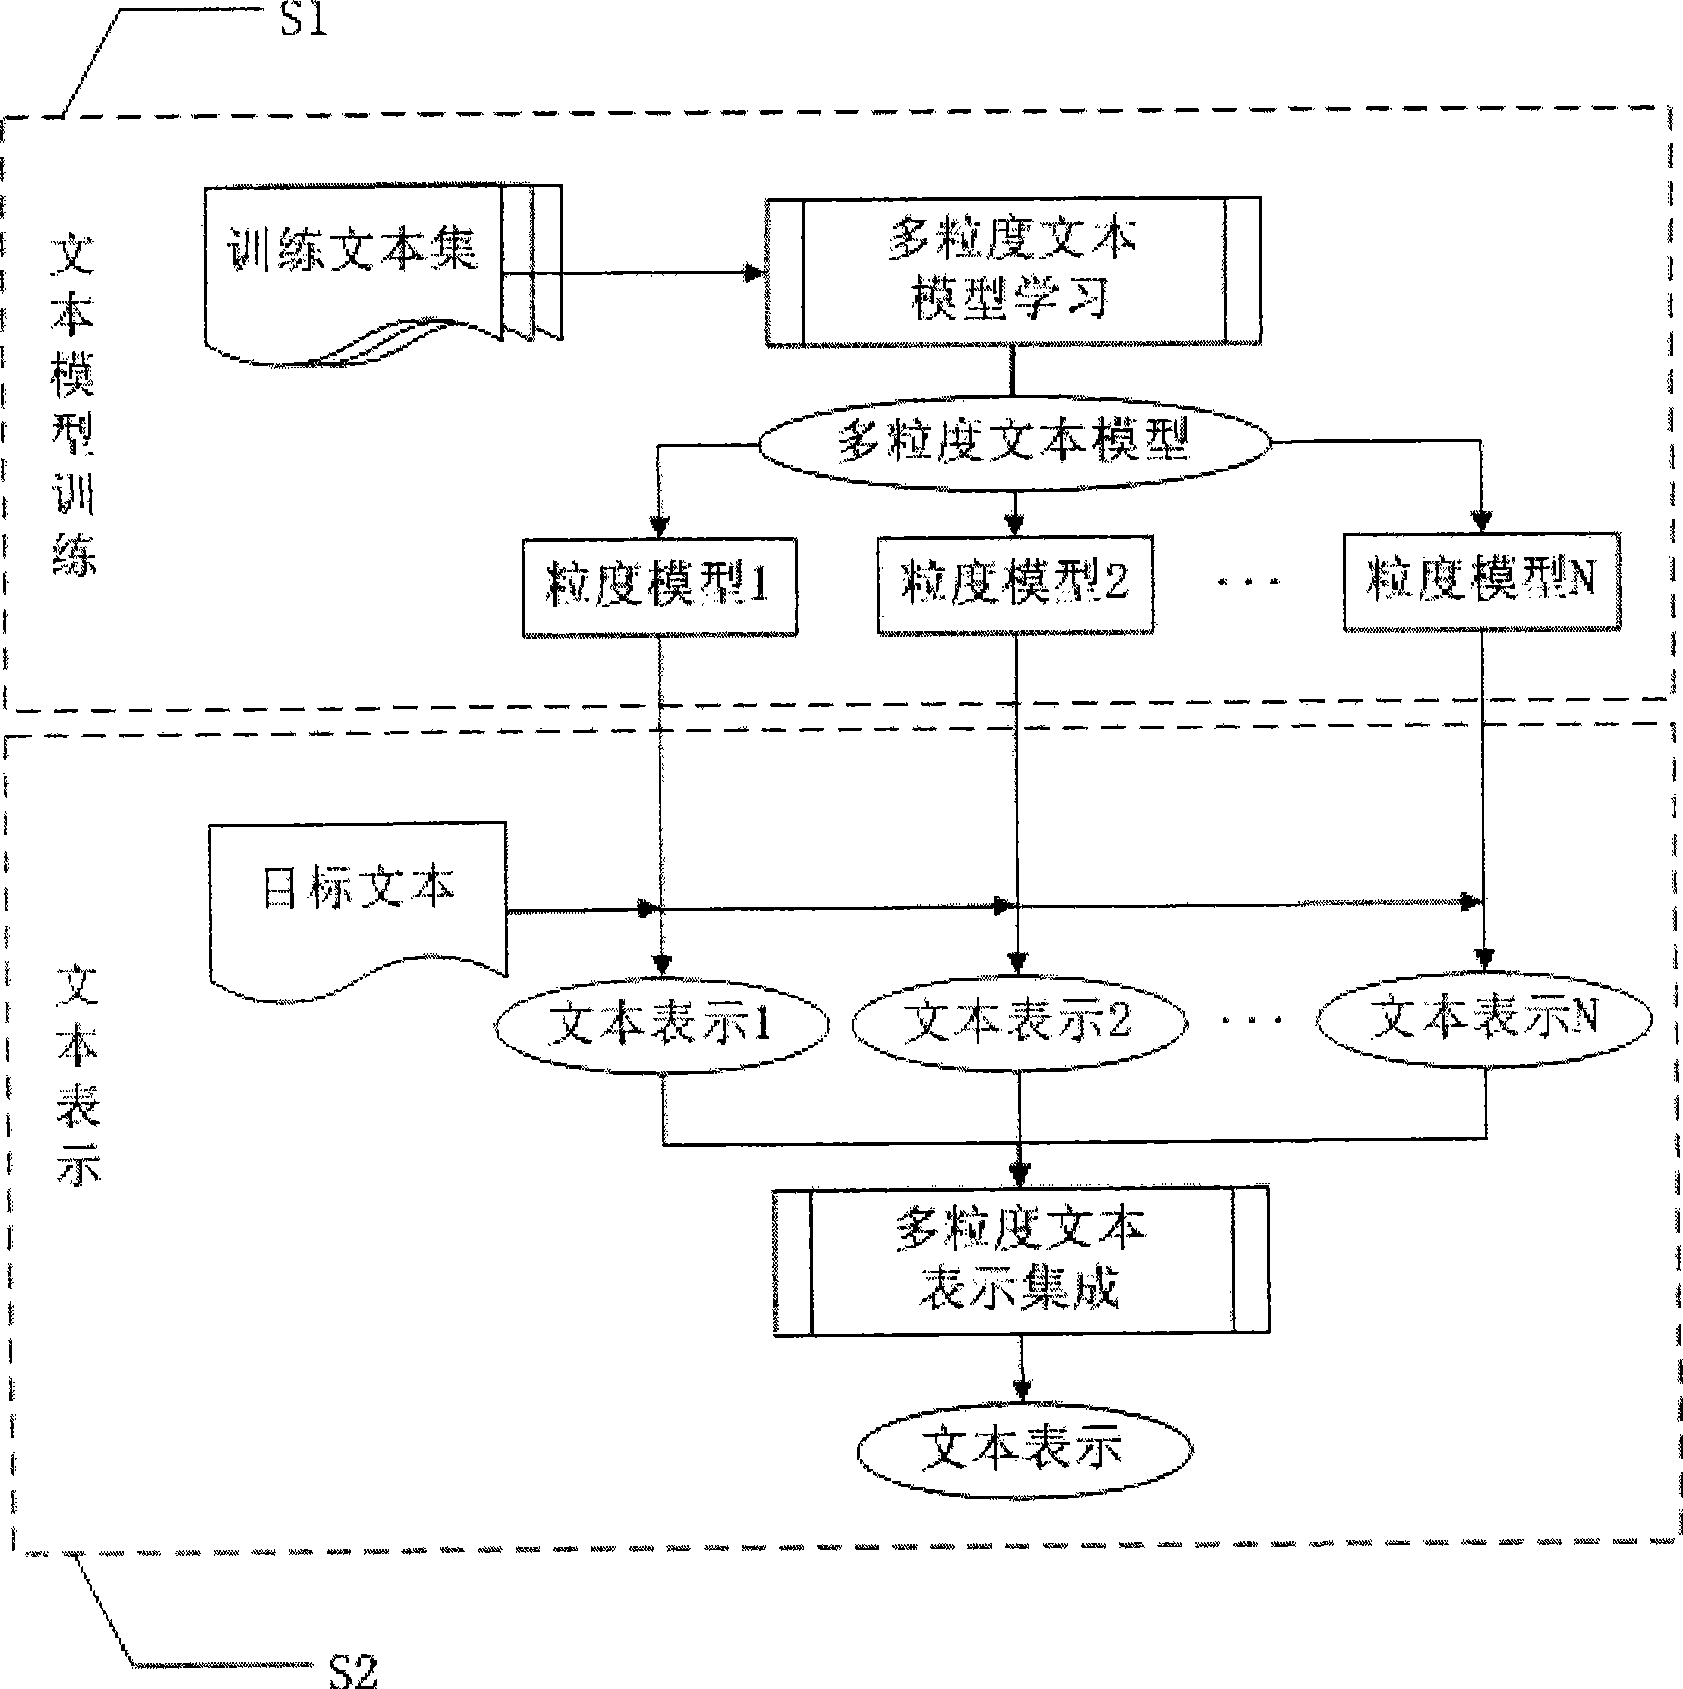 Method for representing multiple graininess of text message